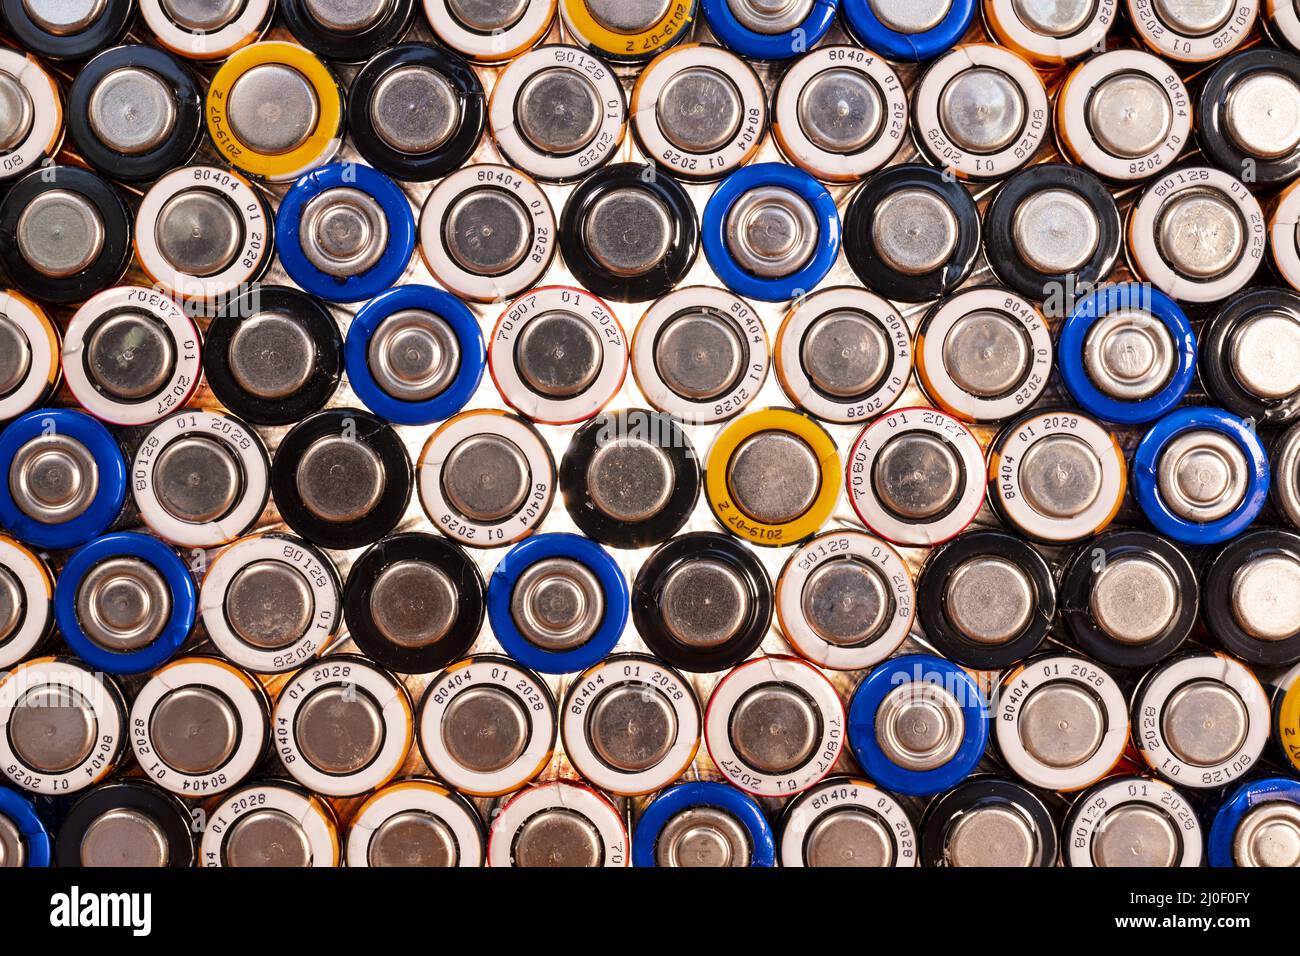 Sofia, Bulgaria - 11 August 2019: Multiple used Duracell AA alkaline  batteries are seen arranged in a pile Stock Photo - Alamy